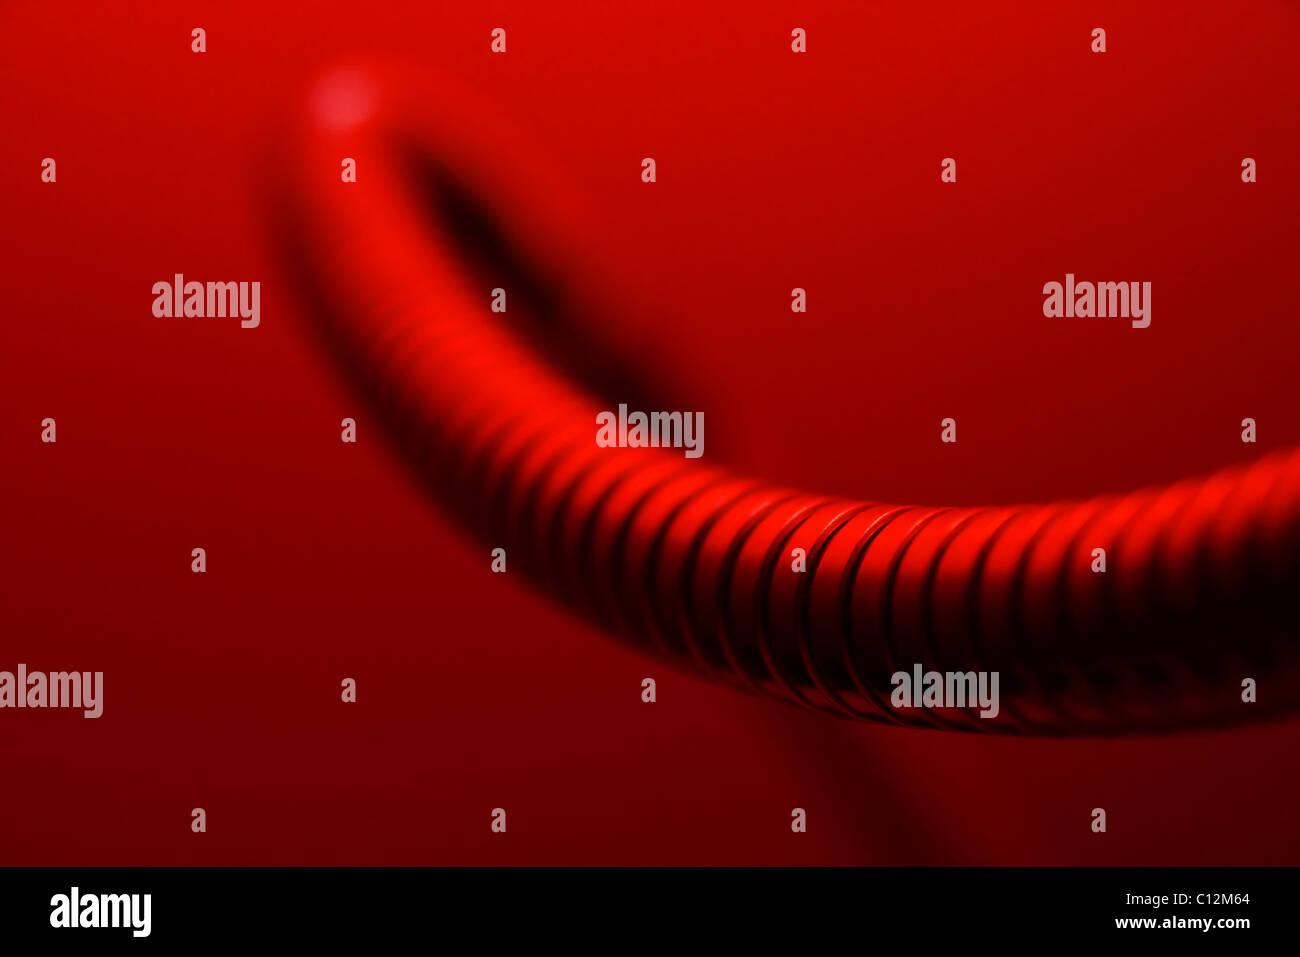 Abstract shape of a metallic tube in red light Stock Photo